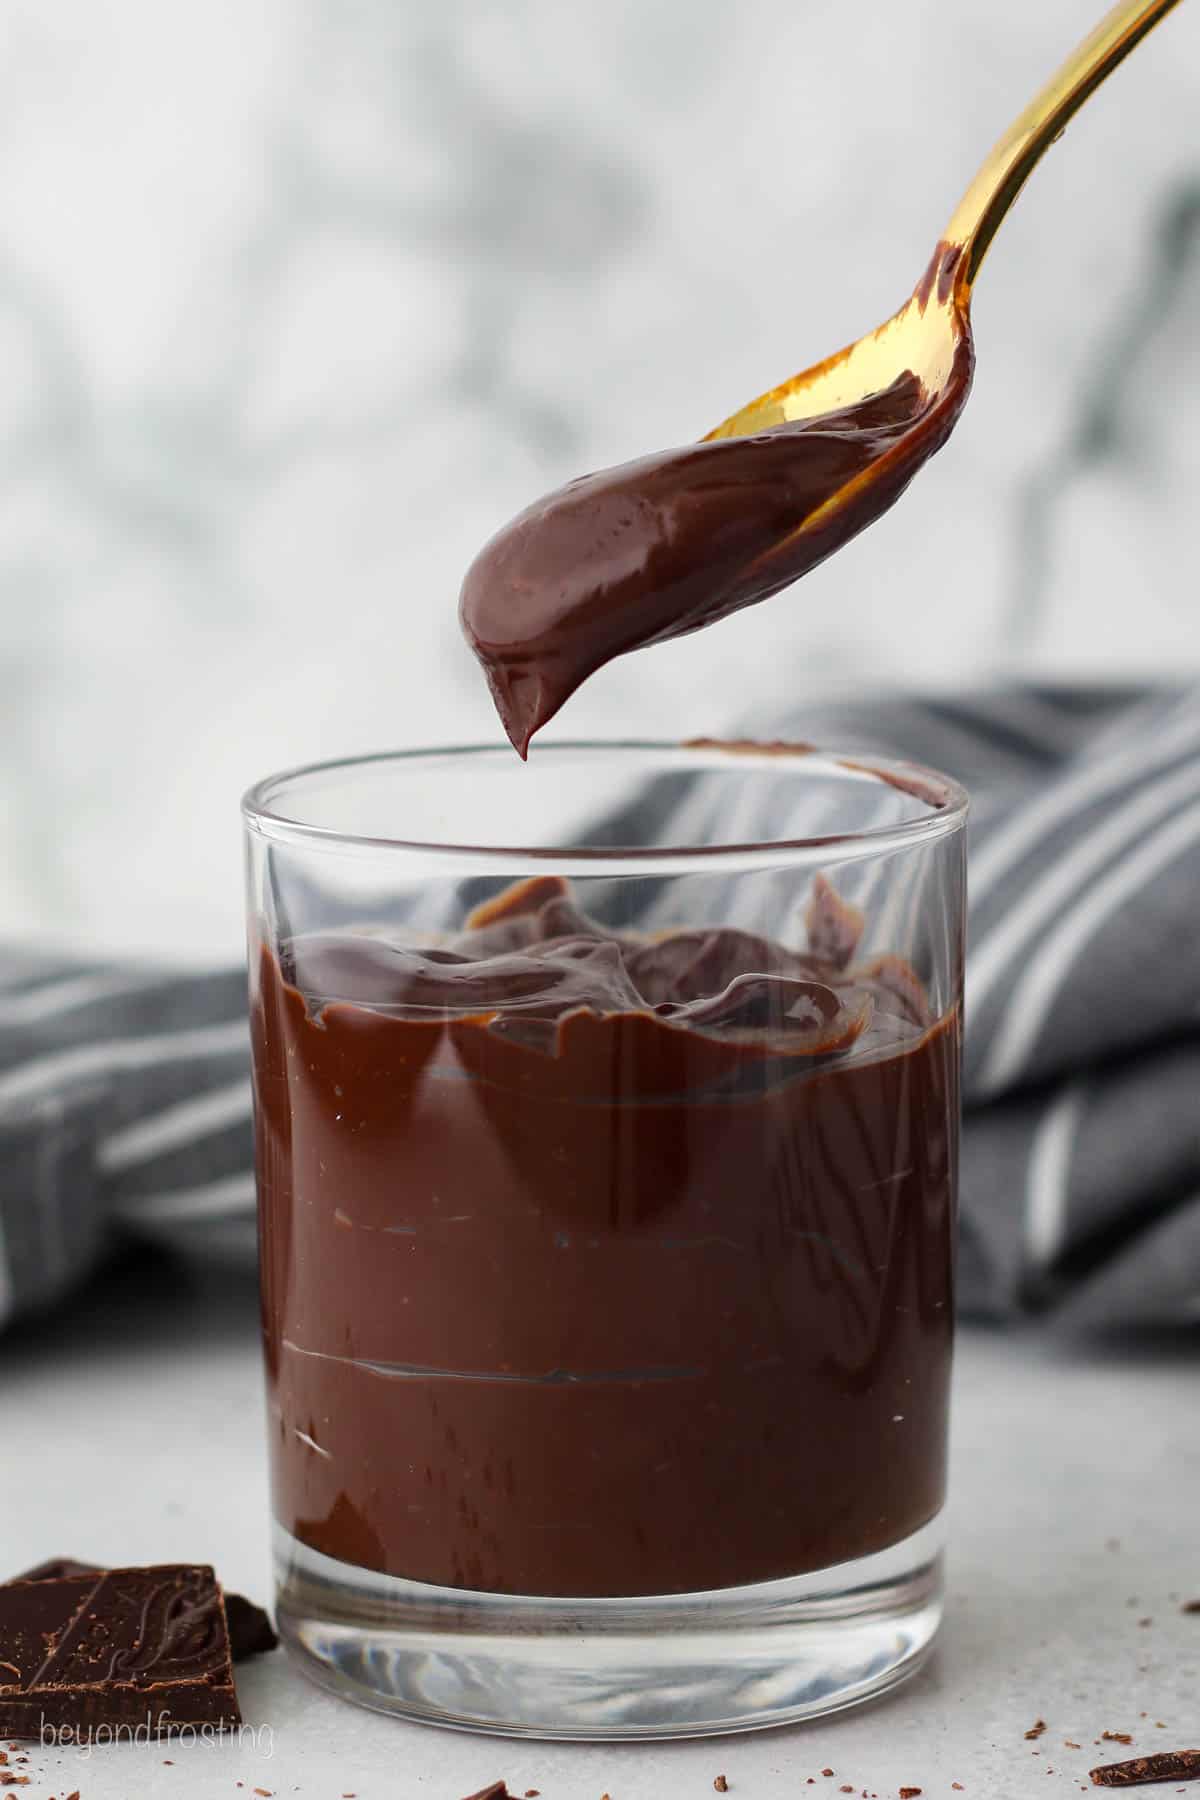 A spoonful held over a glass tumbler filled with chocolate ganache.